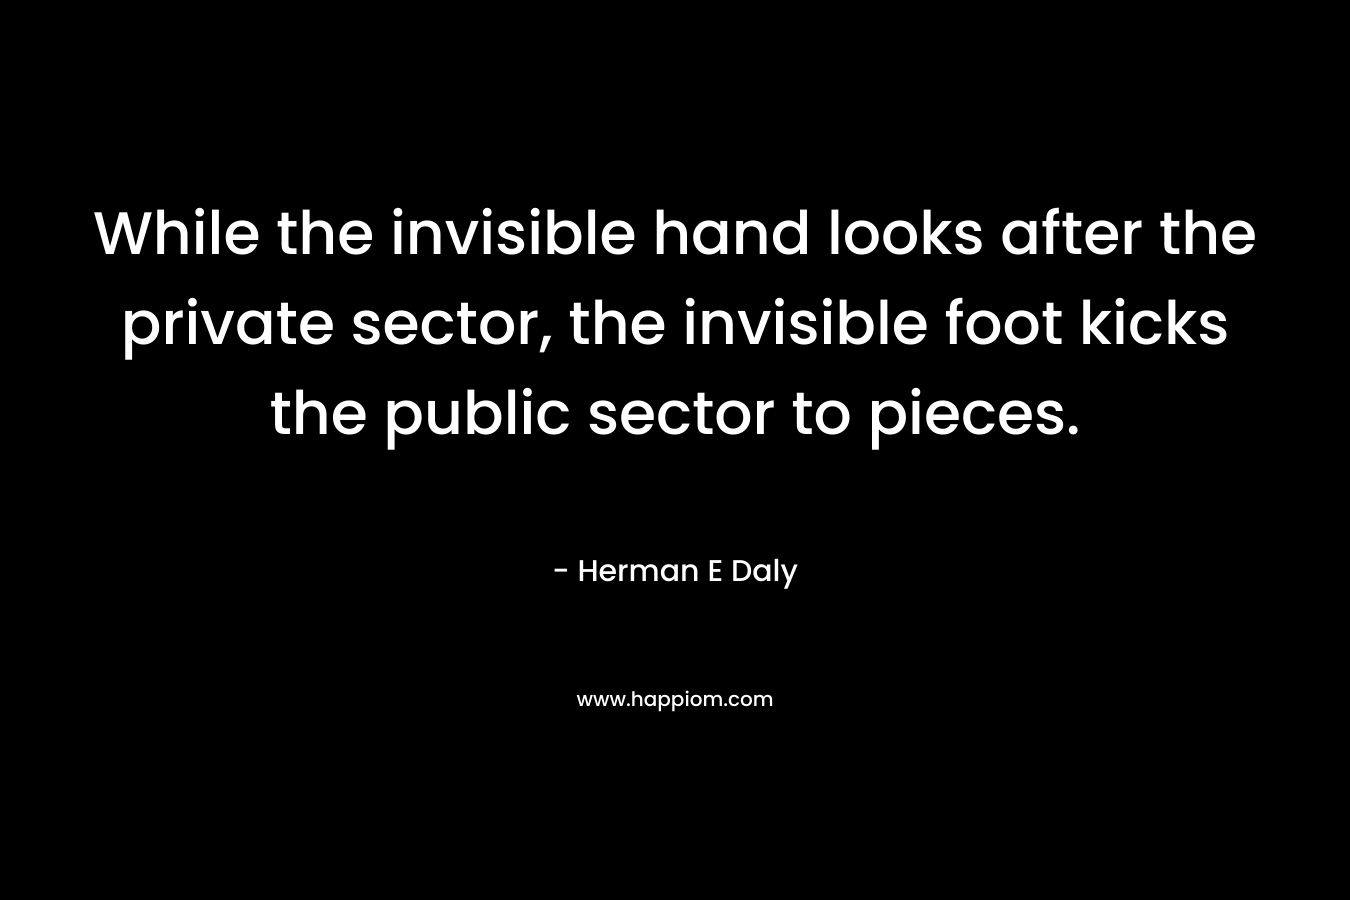 While the invisible hand looks after the private sector, the invisible foot kicks the public sector to pieces.